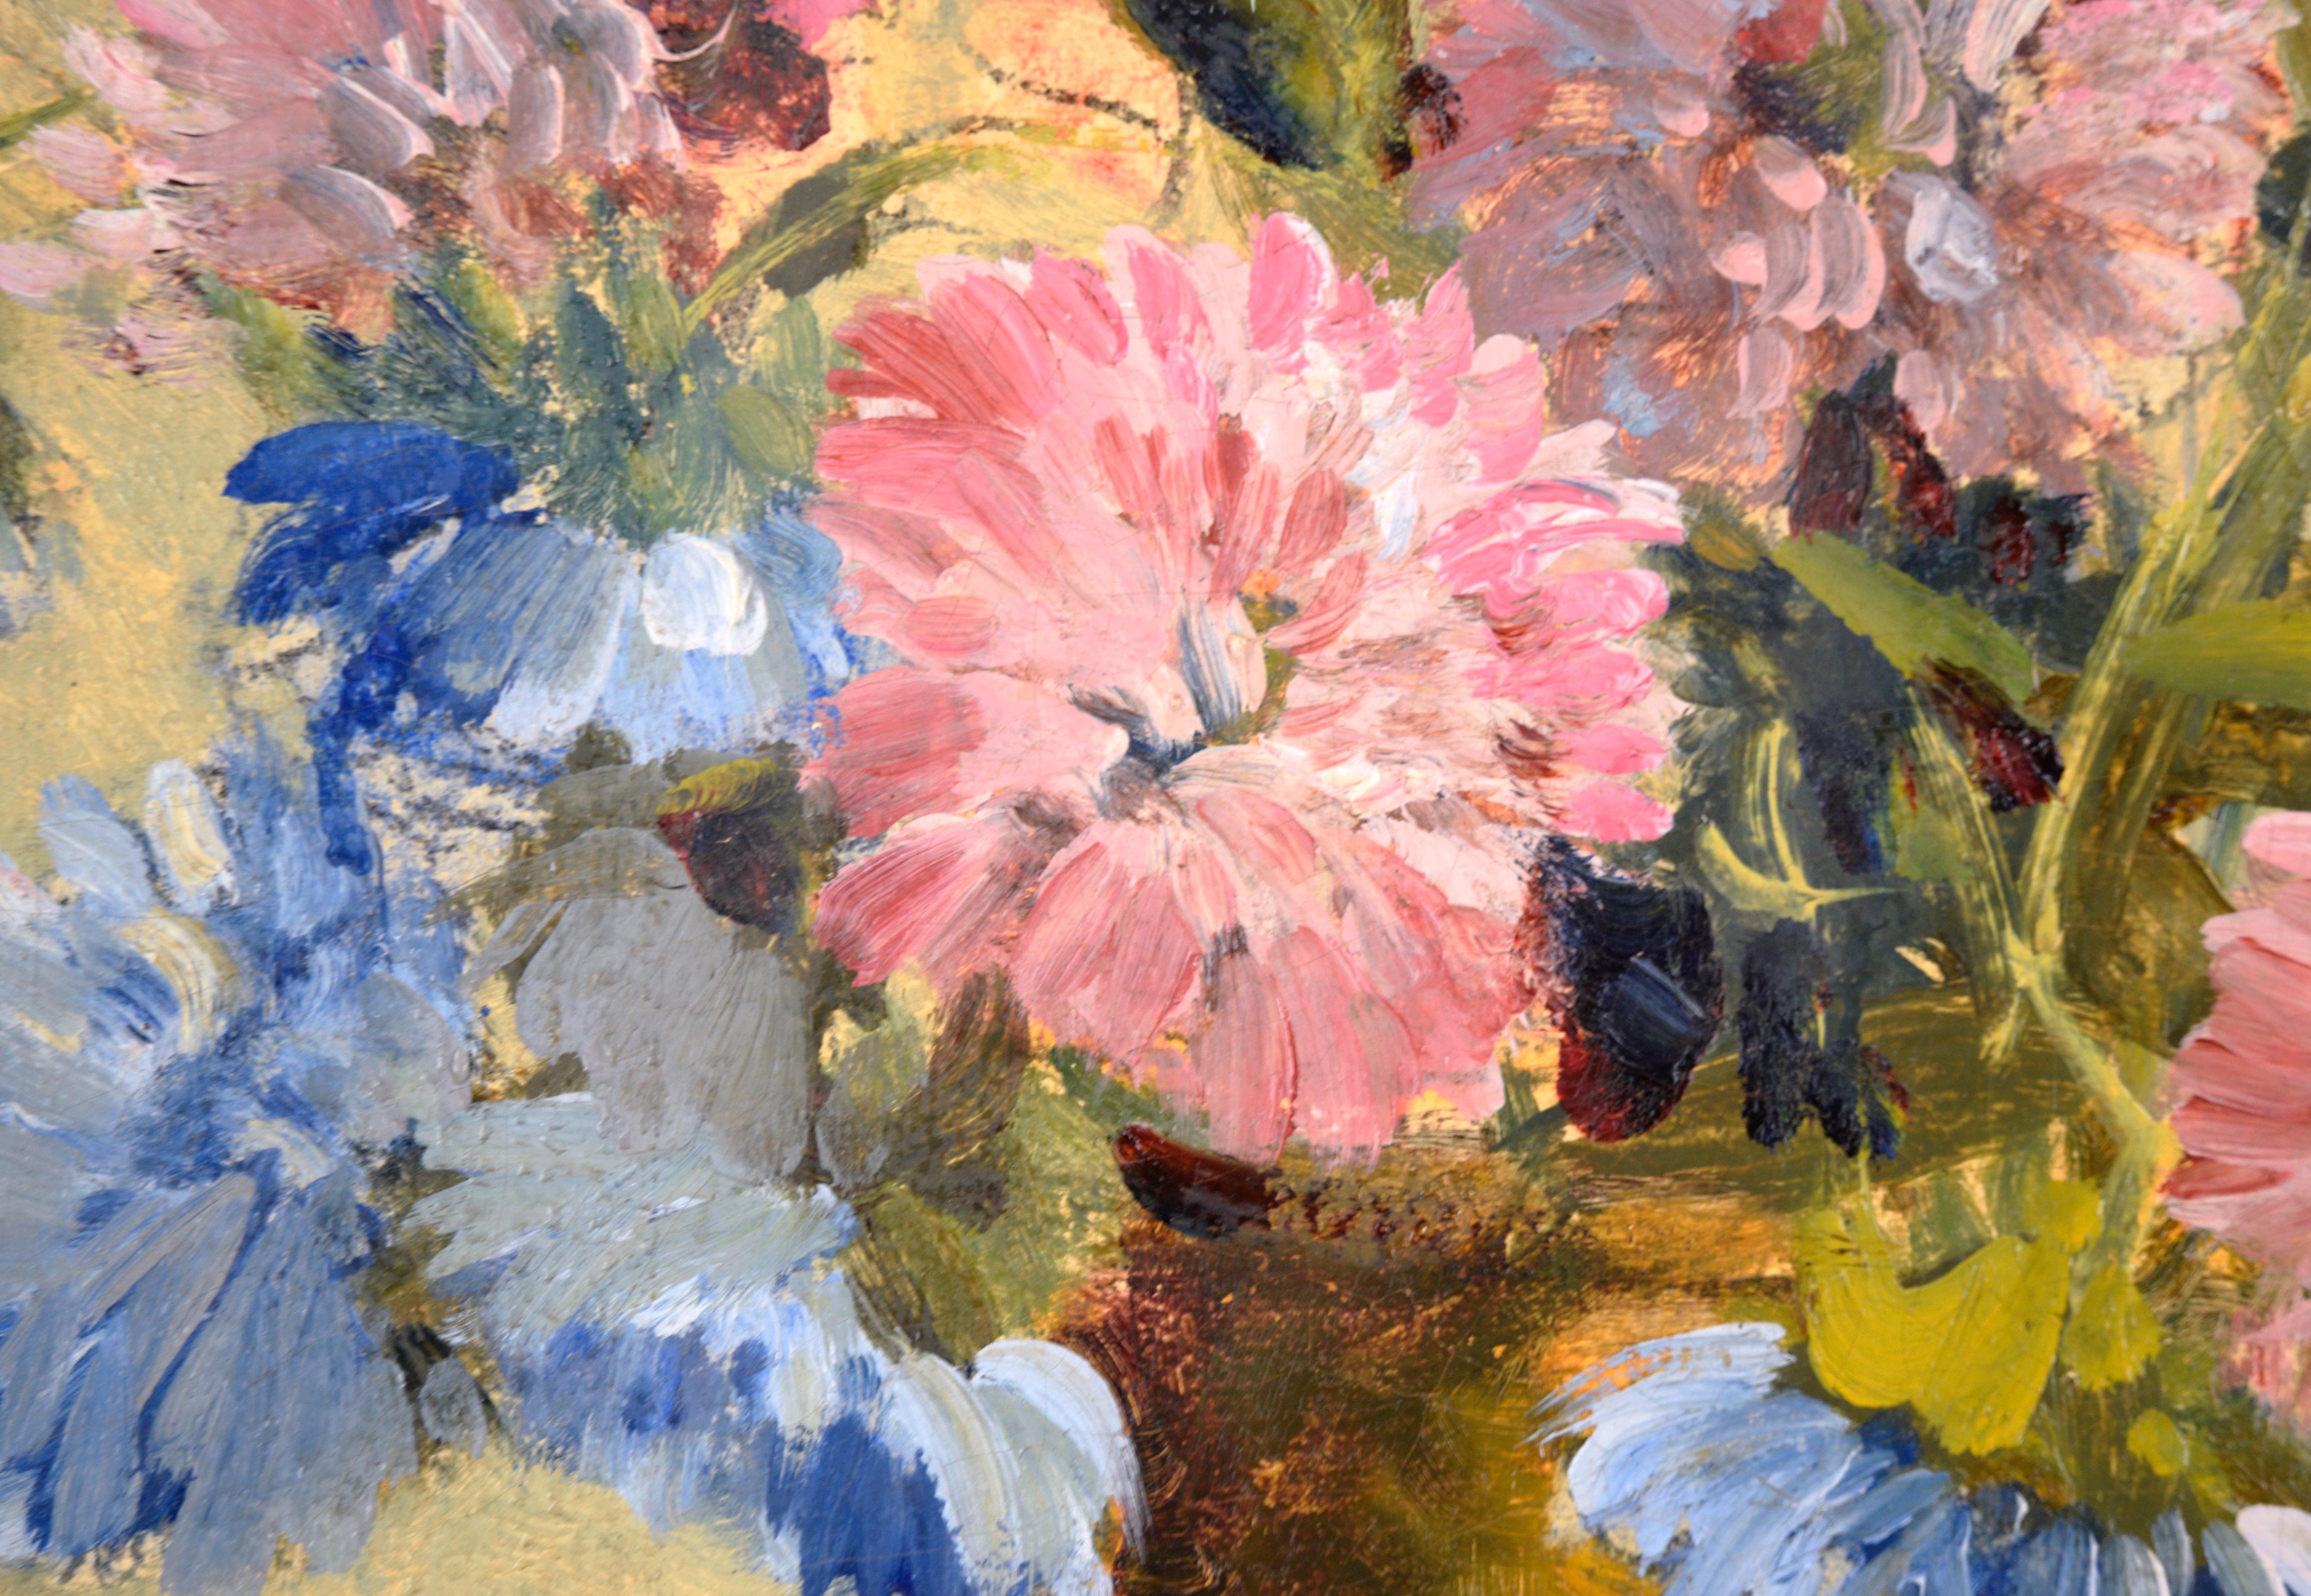 Floral Still Life with Peonies - American Impressionist Painting by A Murray